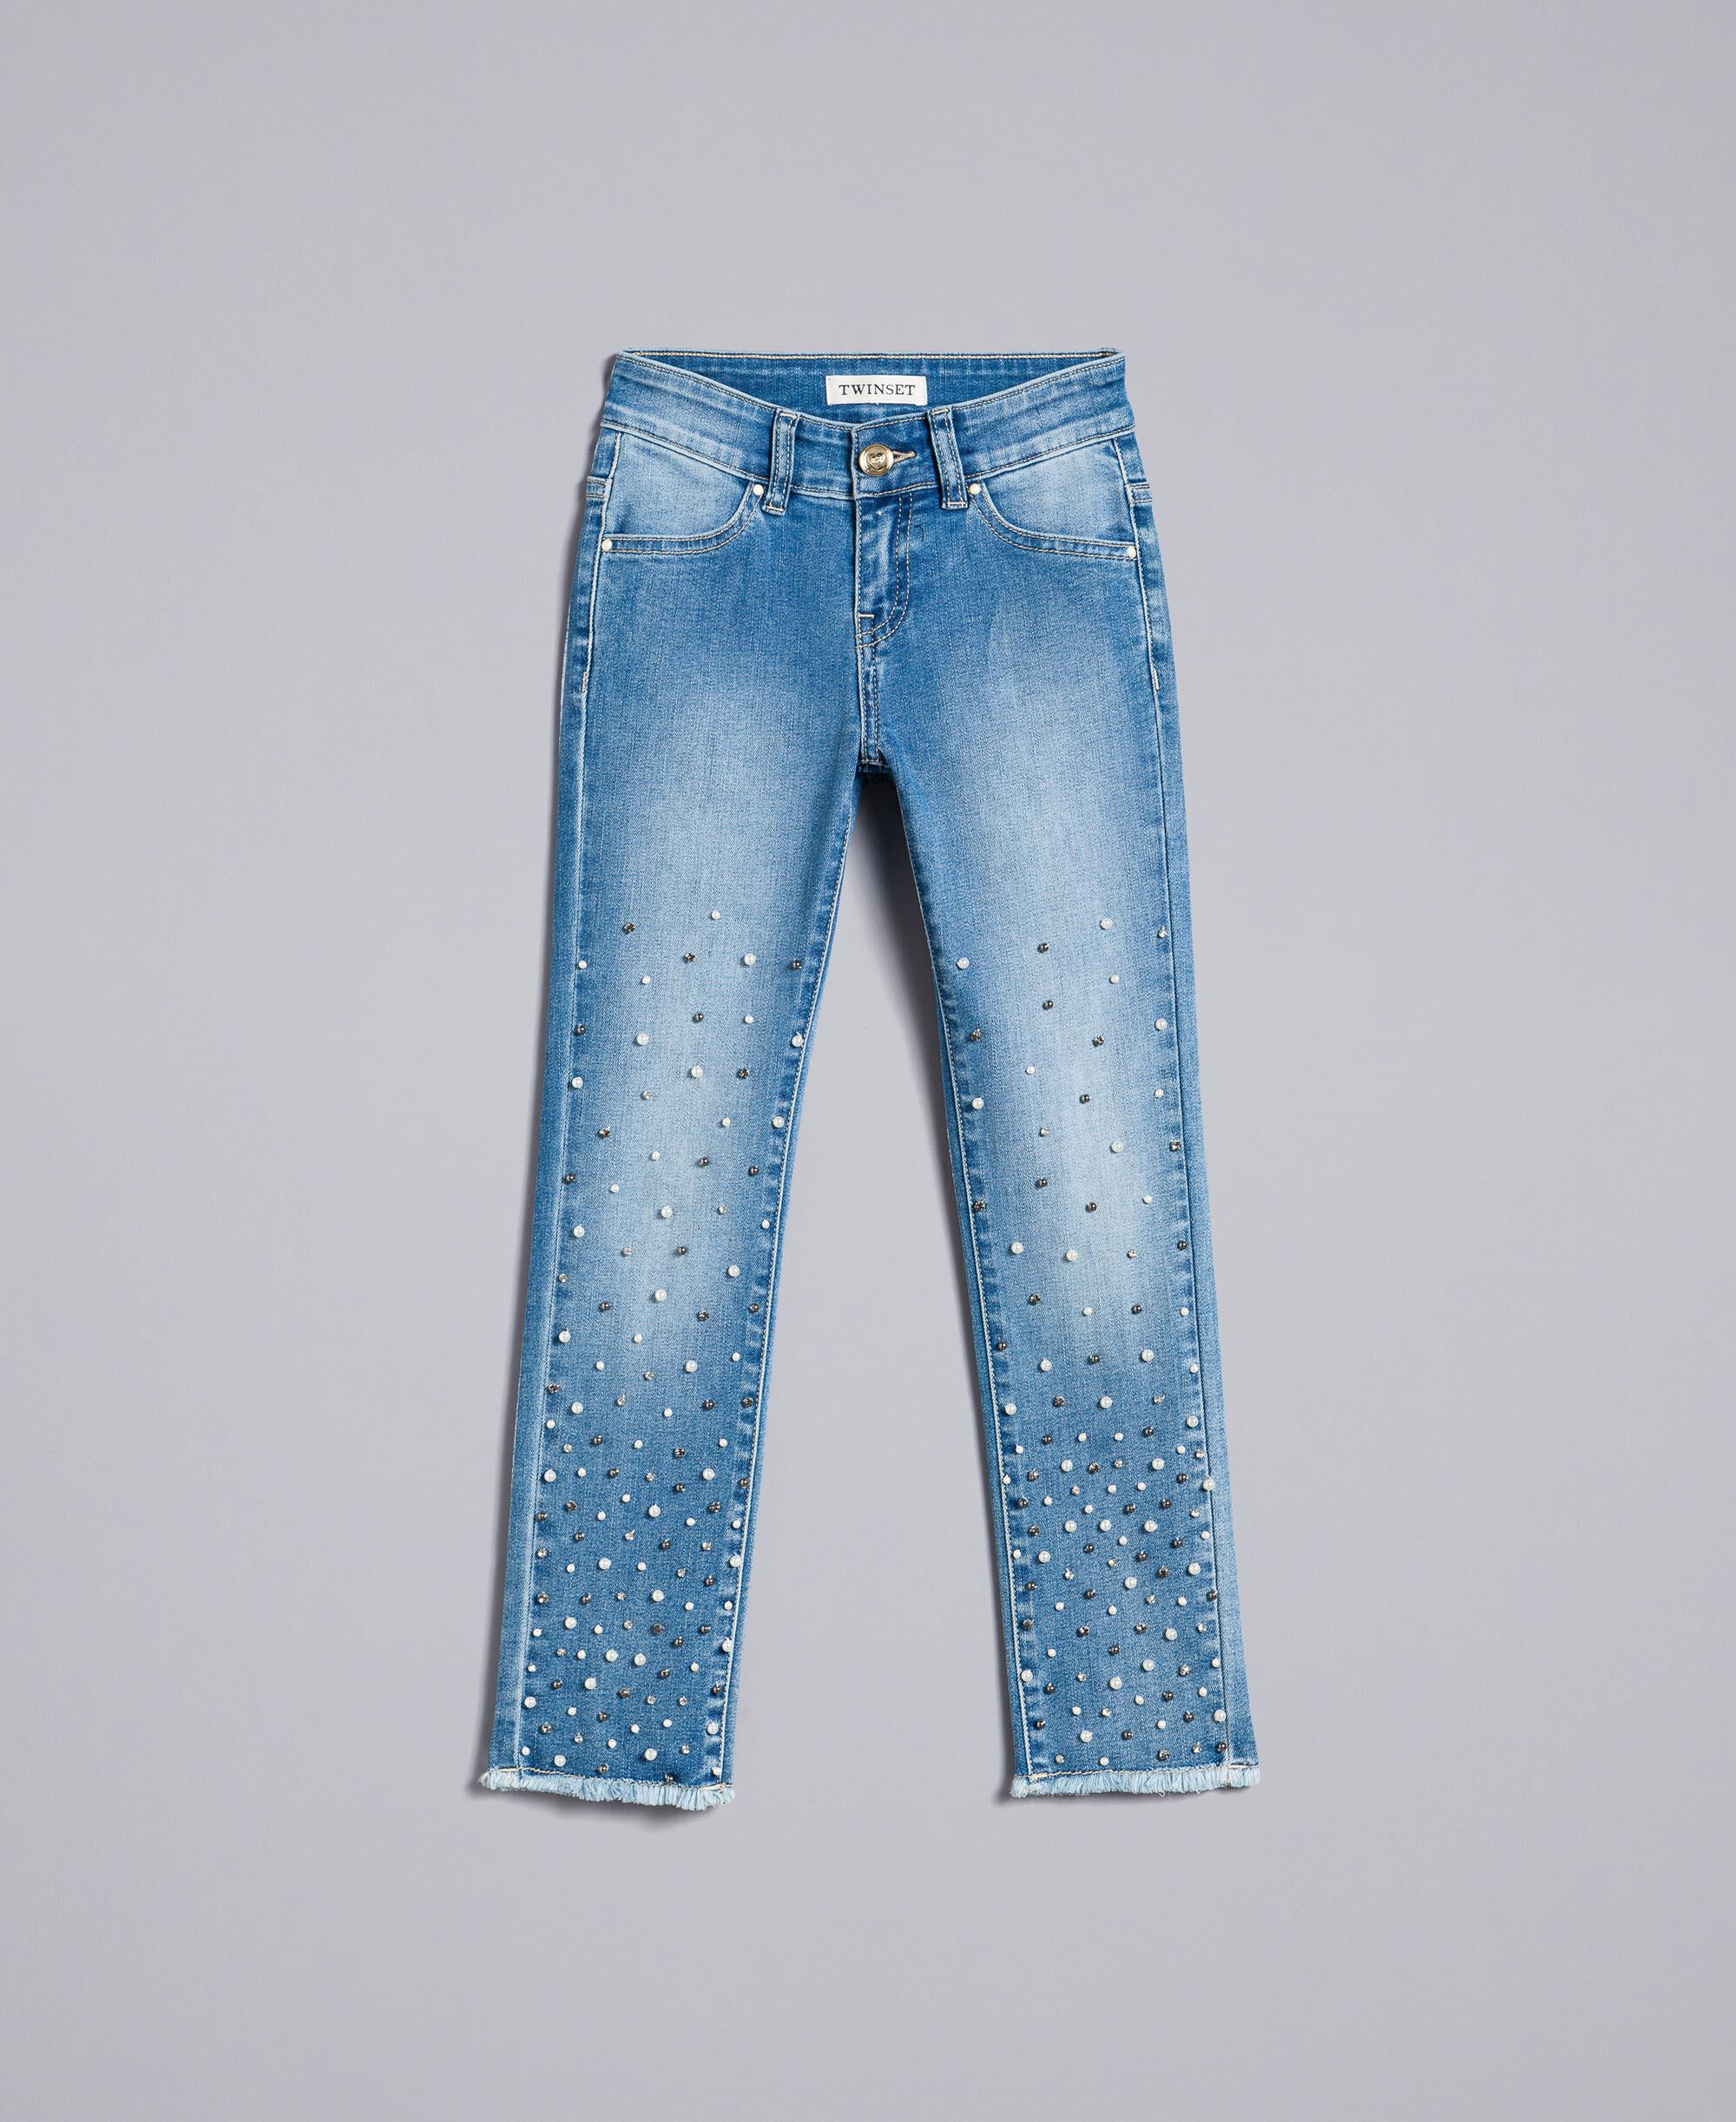 jeans with pearls and rhinestones